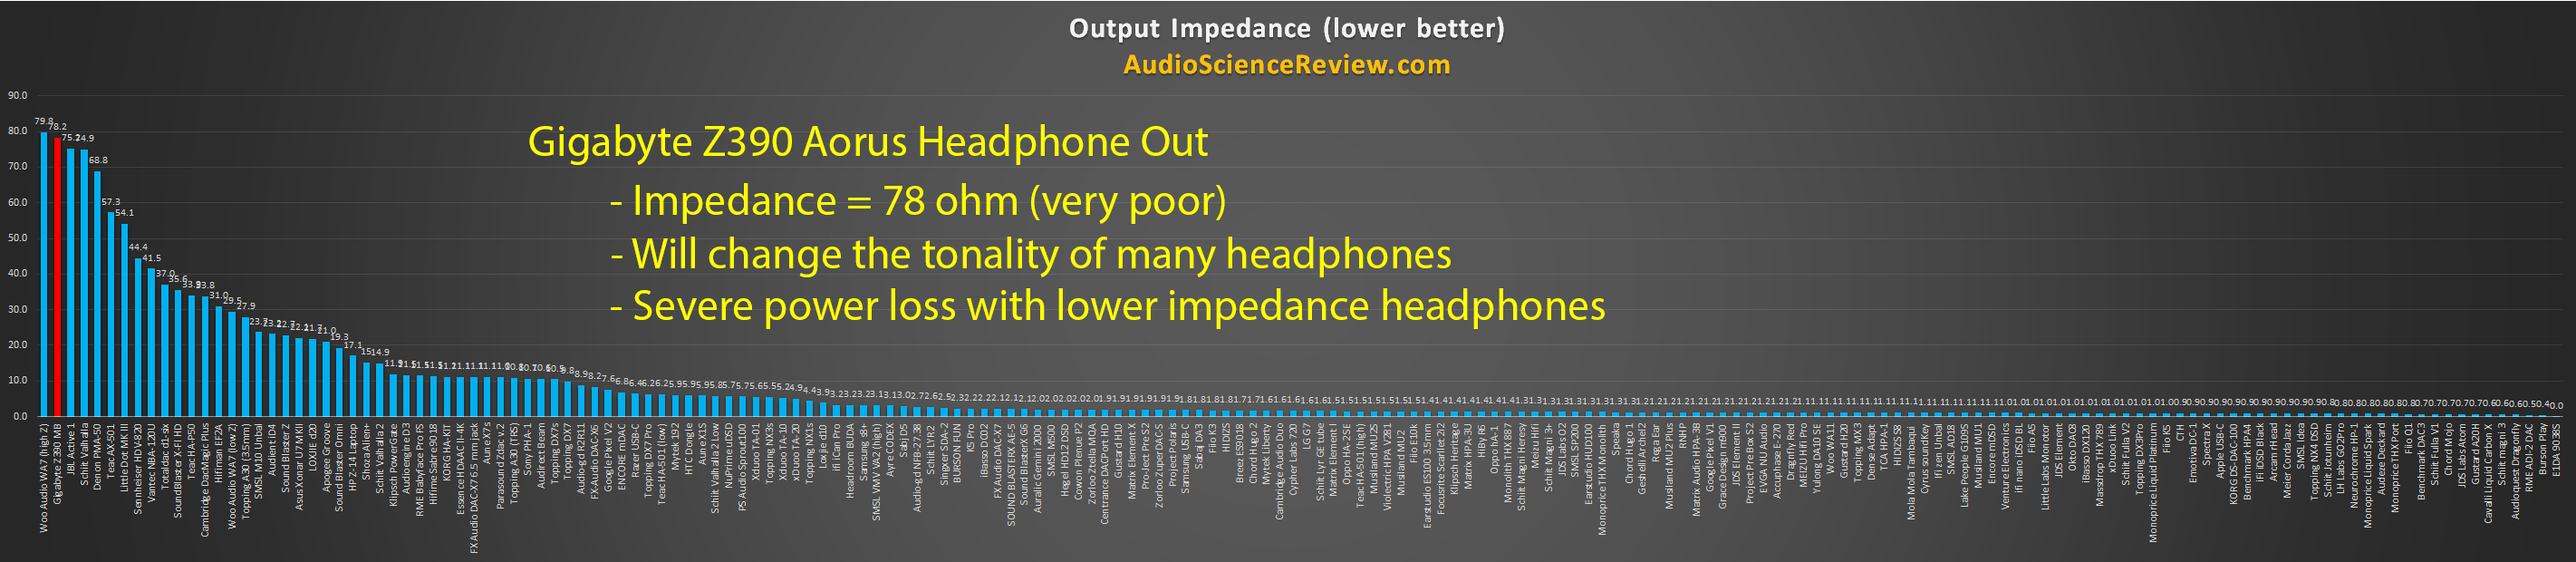 Best PC motherboard headphone output review.png